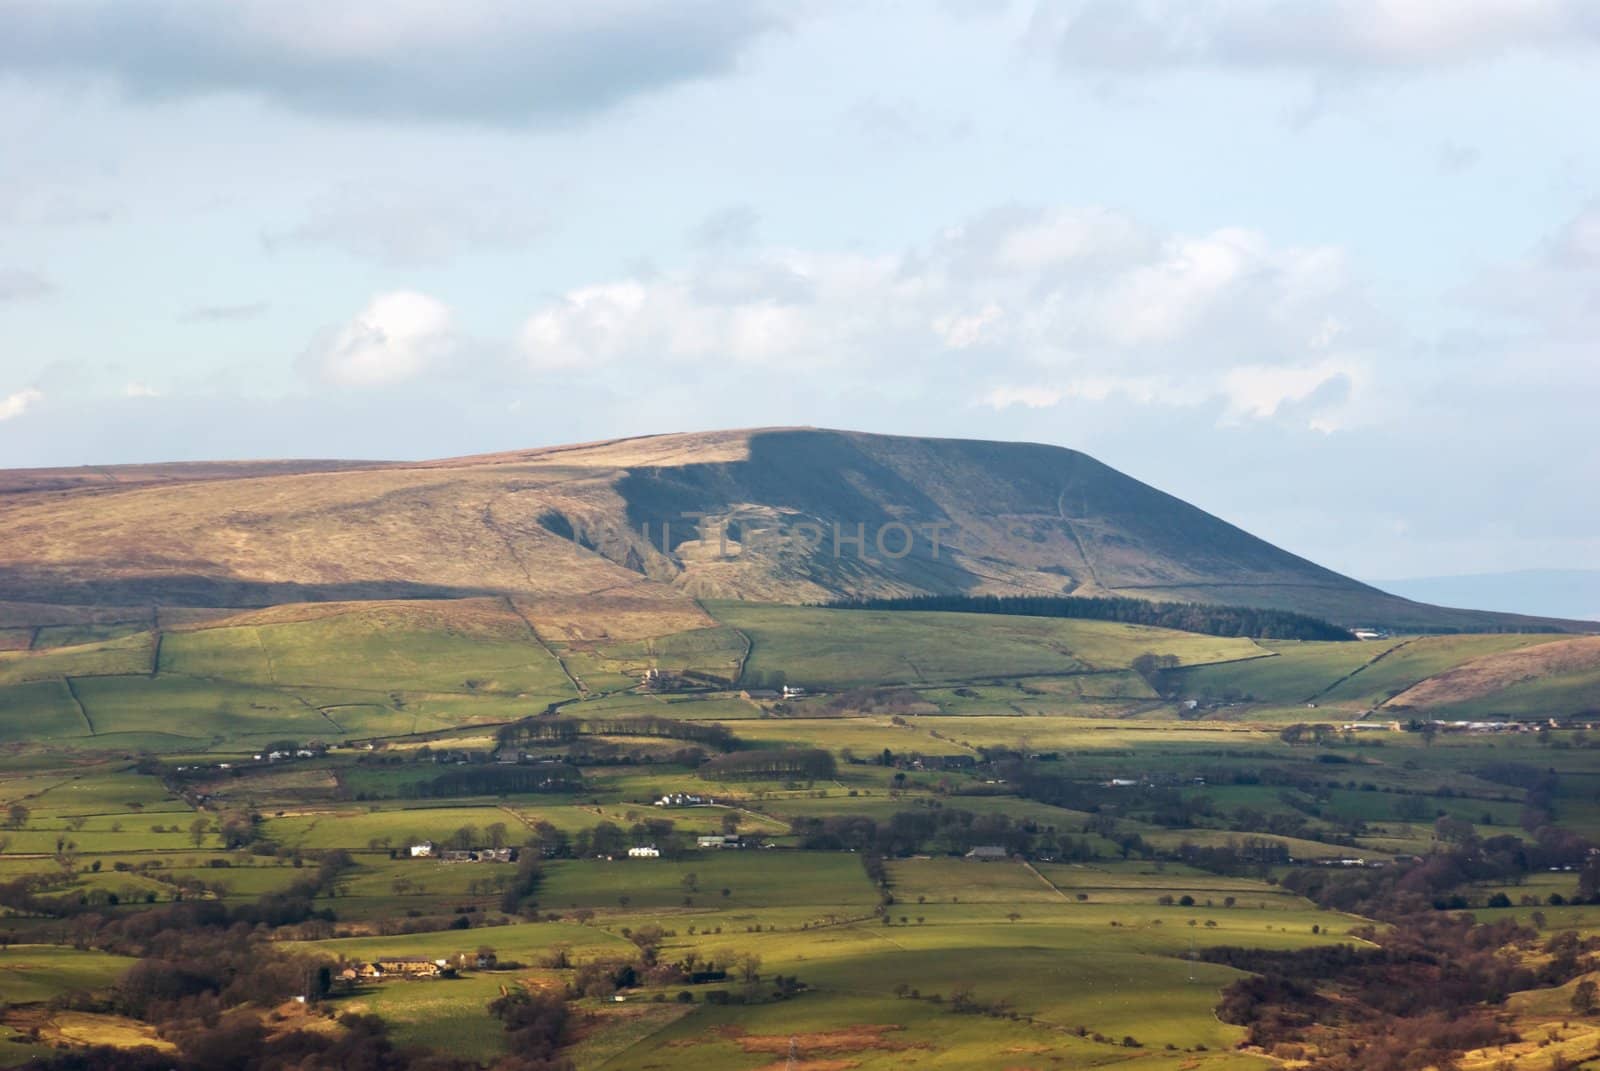 Pendle Hill, Lancashire, England, location of the notorious seventeenth century witch trials